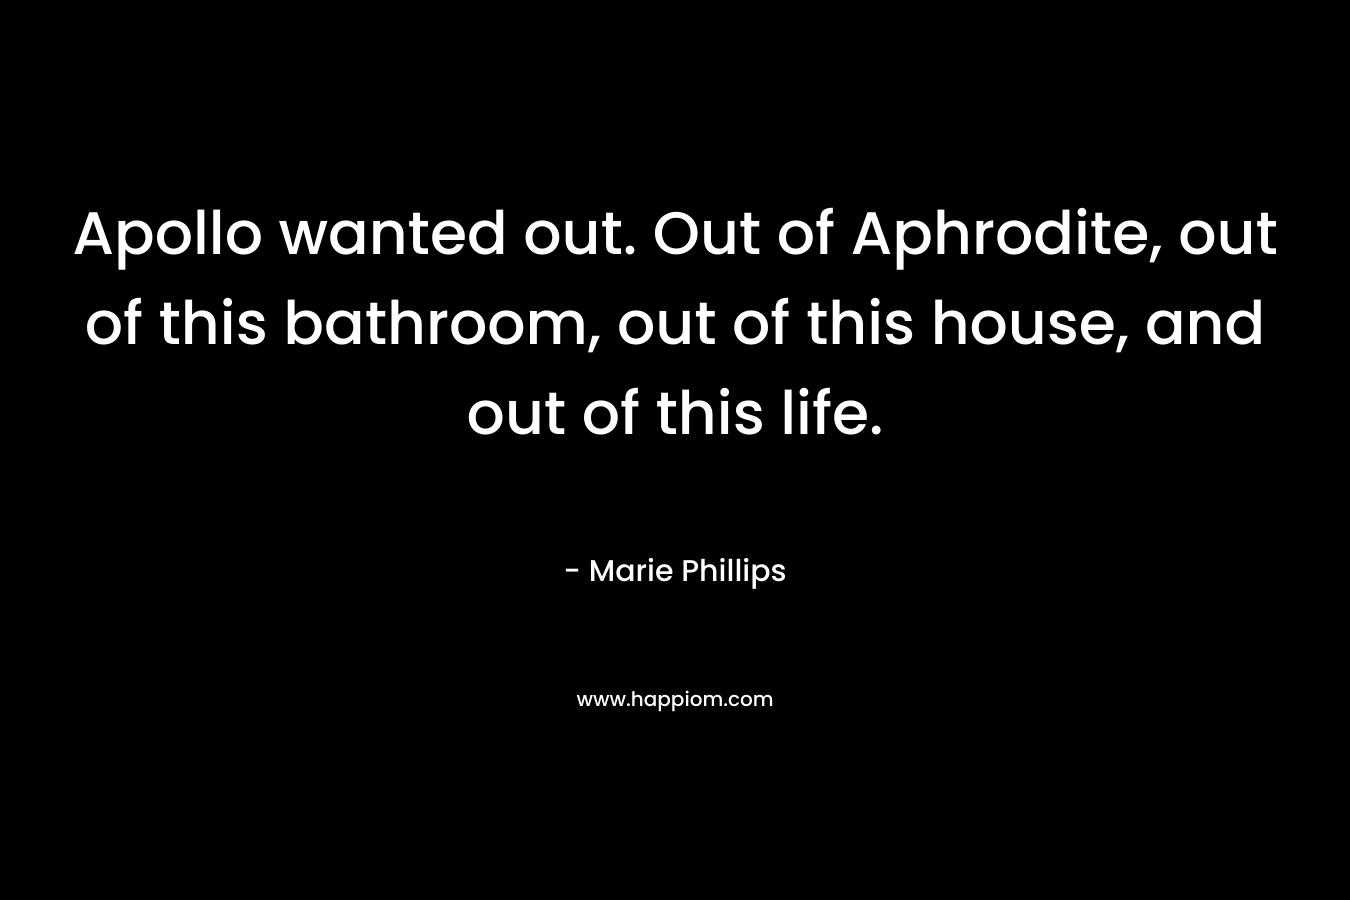 Apollo wanted out. Out of Aphrodite, out of this bathroom, out of this house, and out of this life. – Marie Phillips